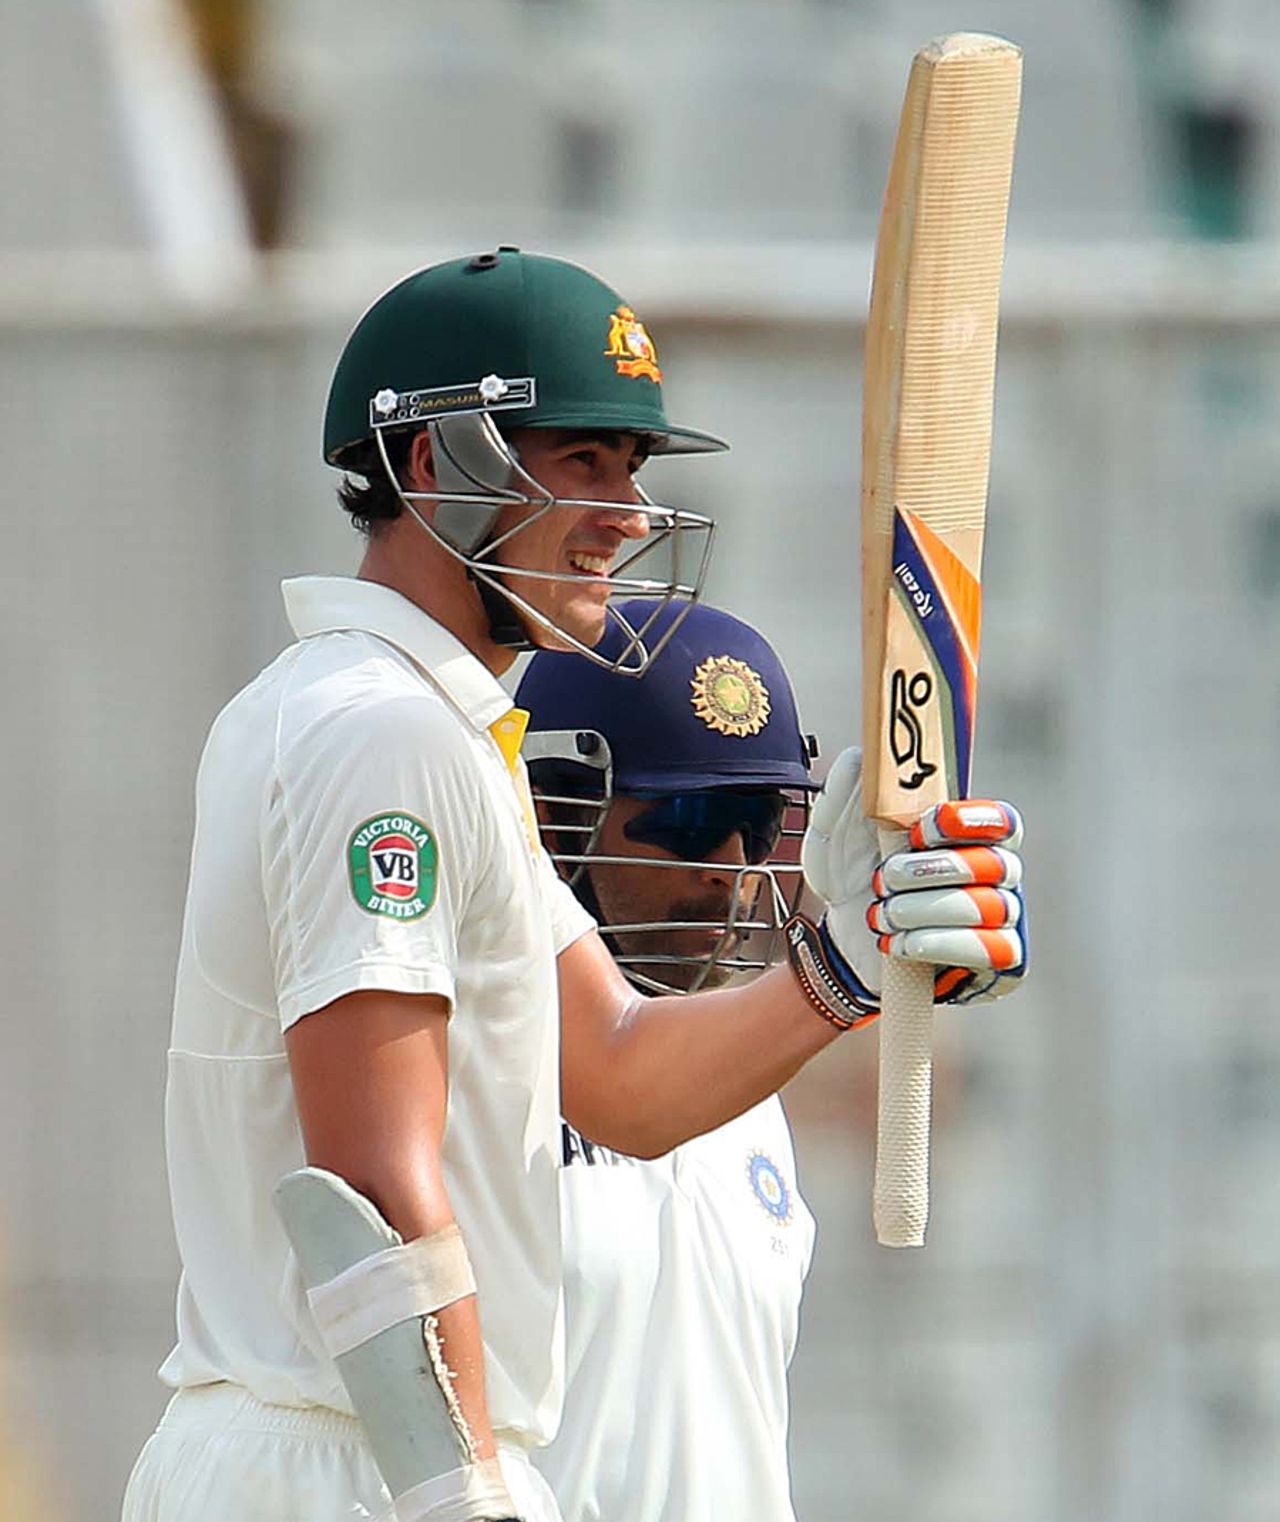 Mitchell Starc raises his bat after reaching fifty, India v Australia, 3rd Test, Mohali, 3rd day, March 16, 2013